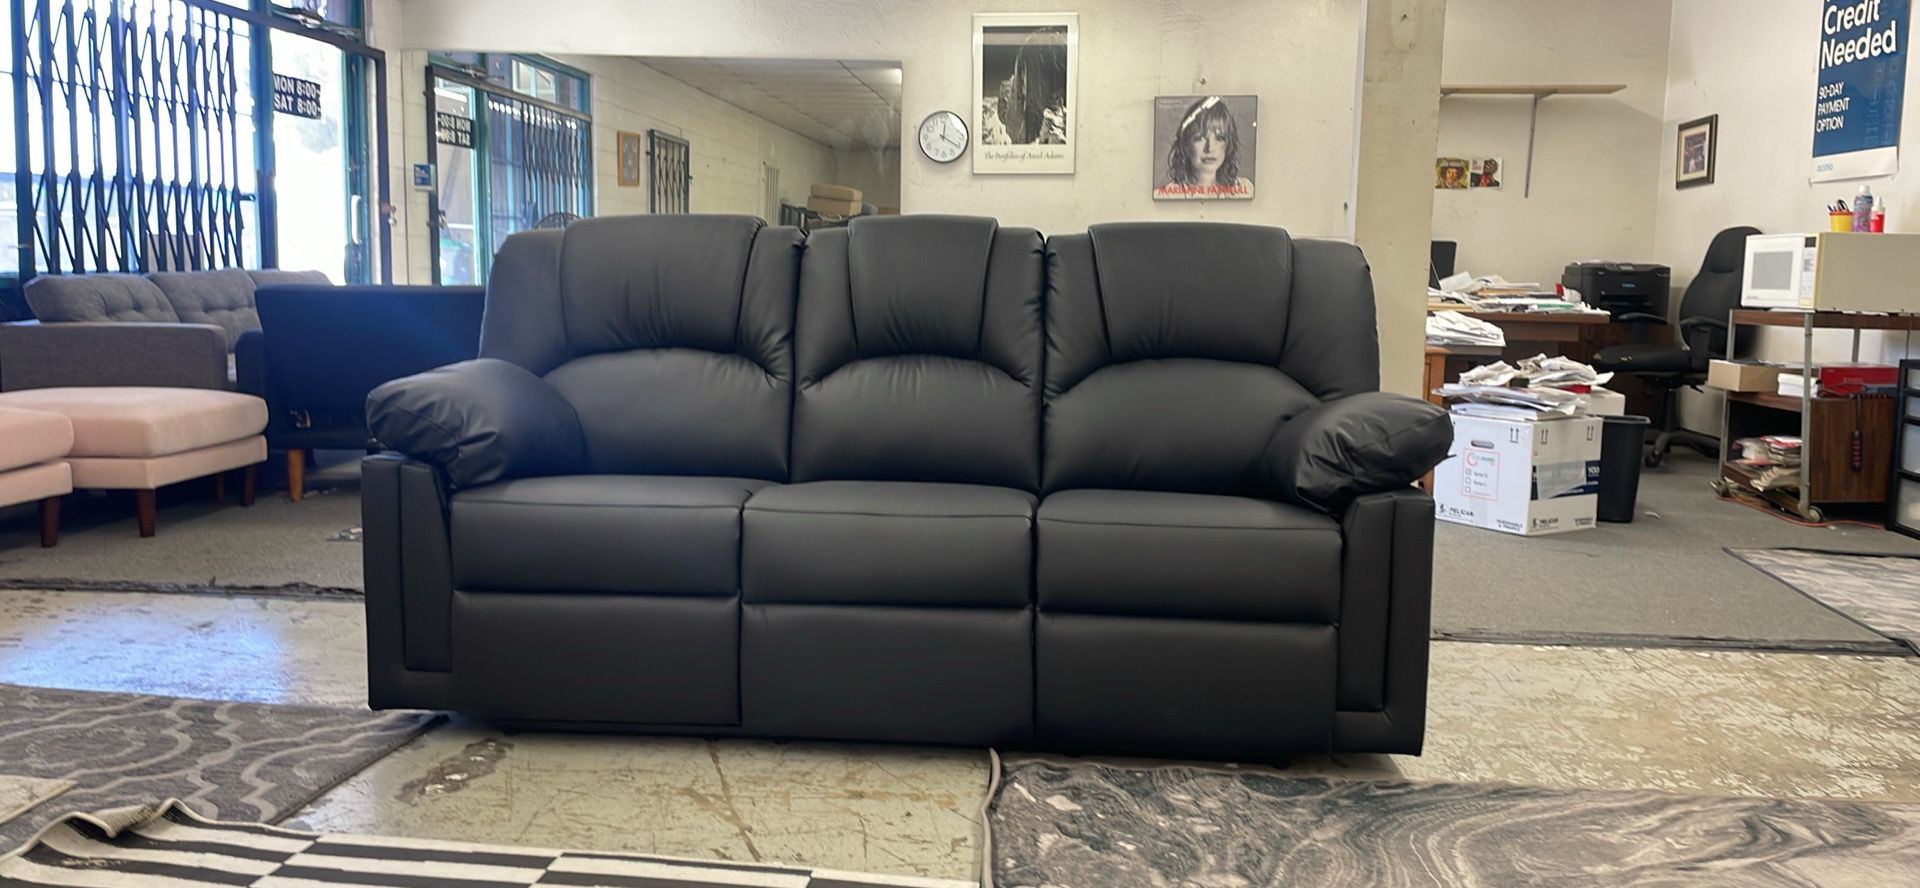 New Black Recliner Couch / Free Delivery 